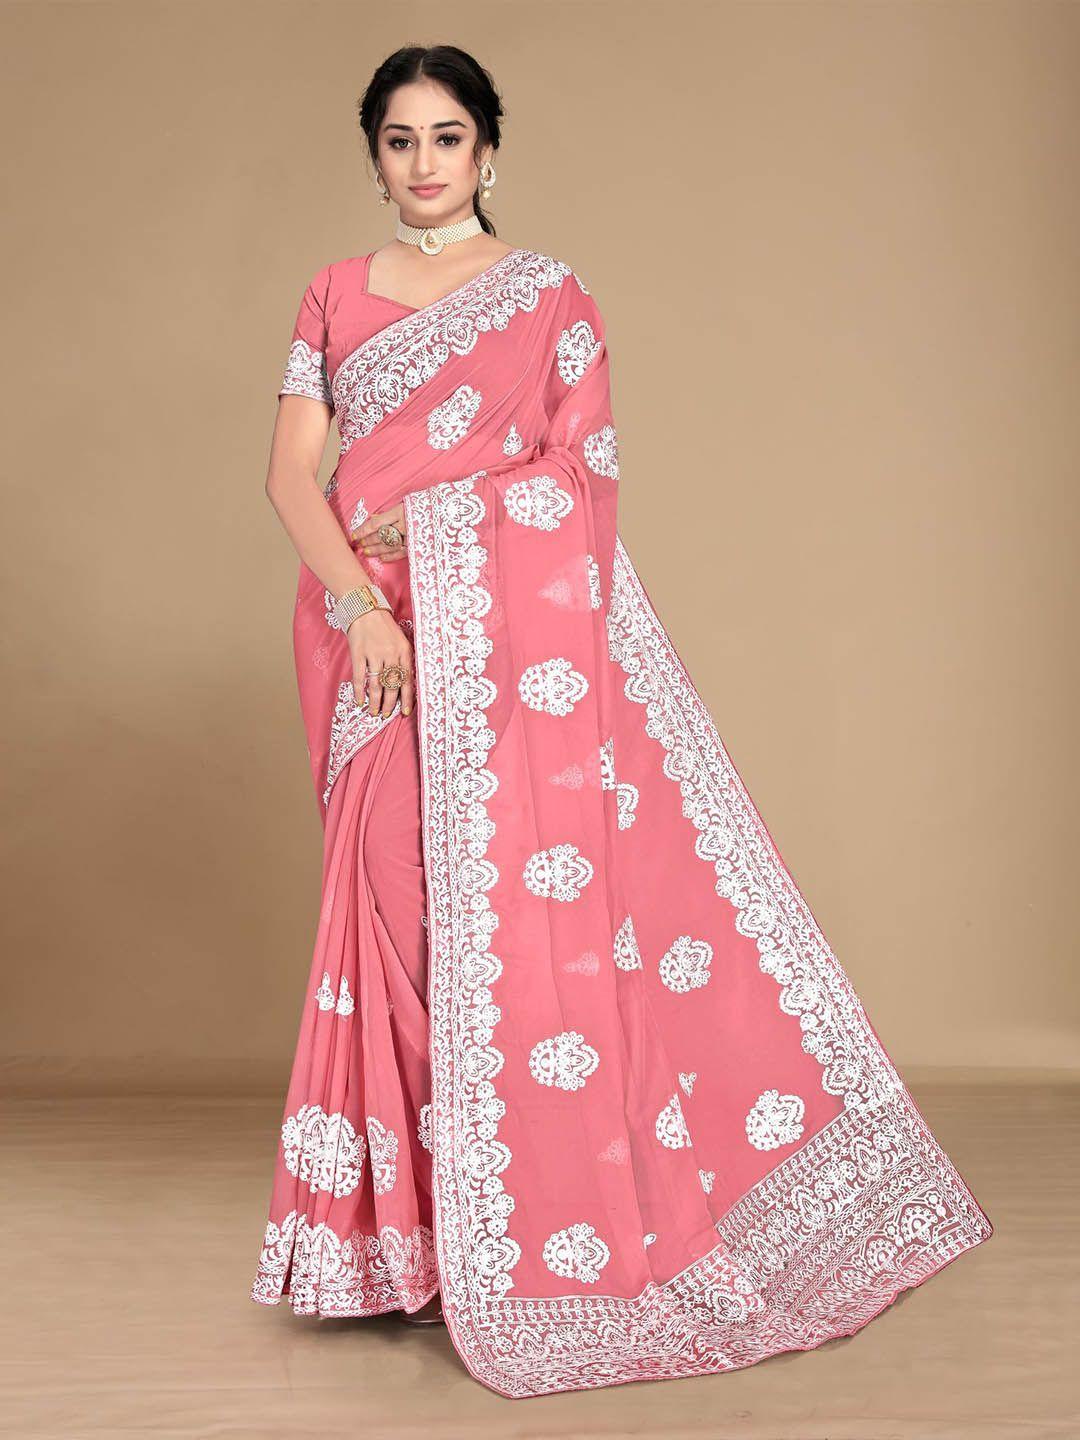 here&now peach-coloured & white floral embroidered saree